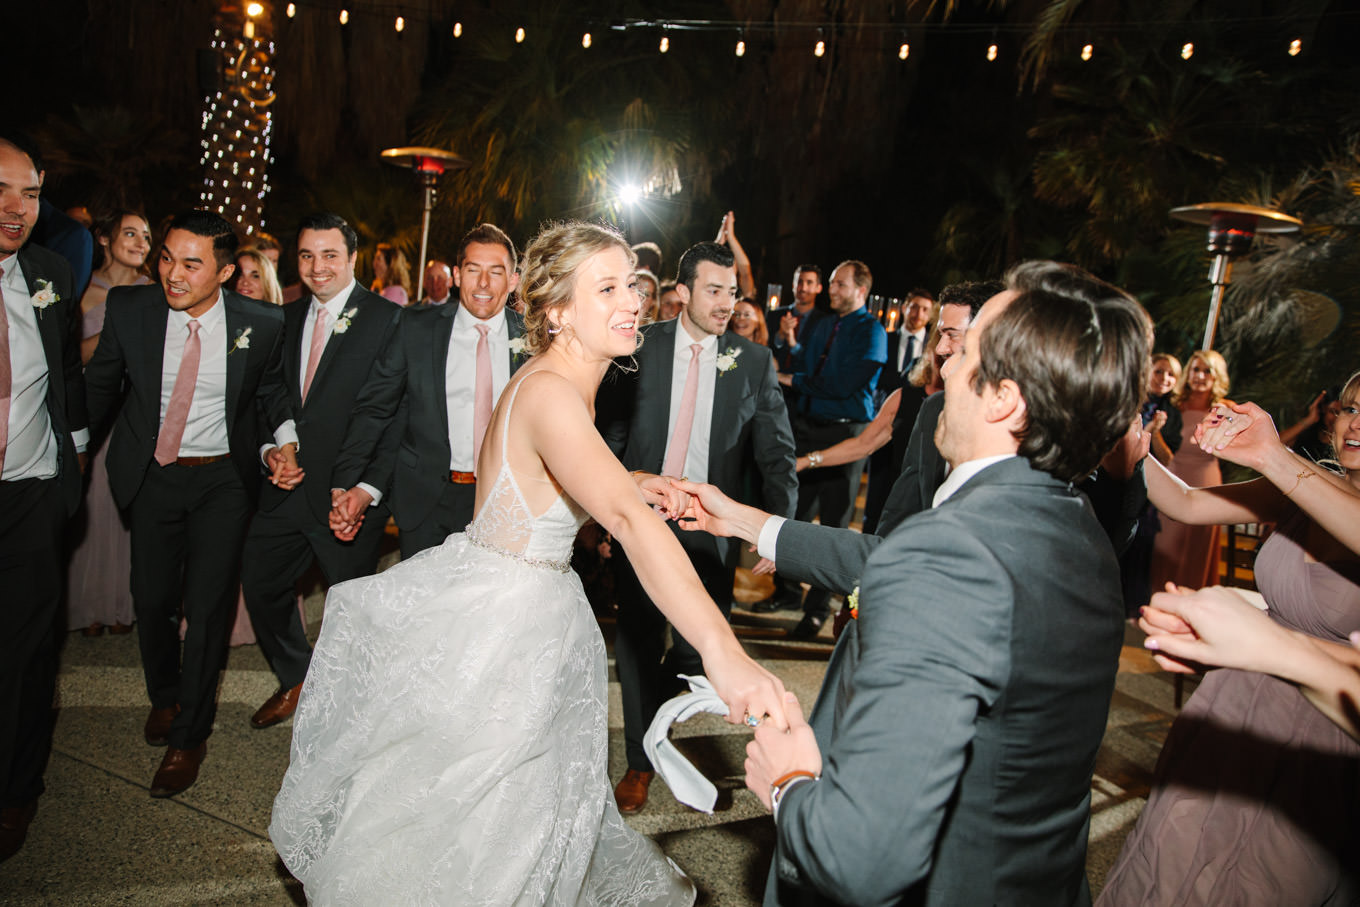 Bride and groom dancing at reception | Living Desert Zoo & Gardens wedding with unique details | Elevated and colorful wedding photography for fun-loving couples in Southern California |  #PalmSprings #palmspringsphotographer #gardenwedding #palmspringswedding  Source: Mary Costa Photography | Los Angeles wedding photographer 